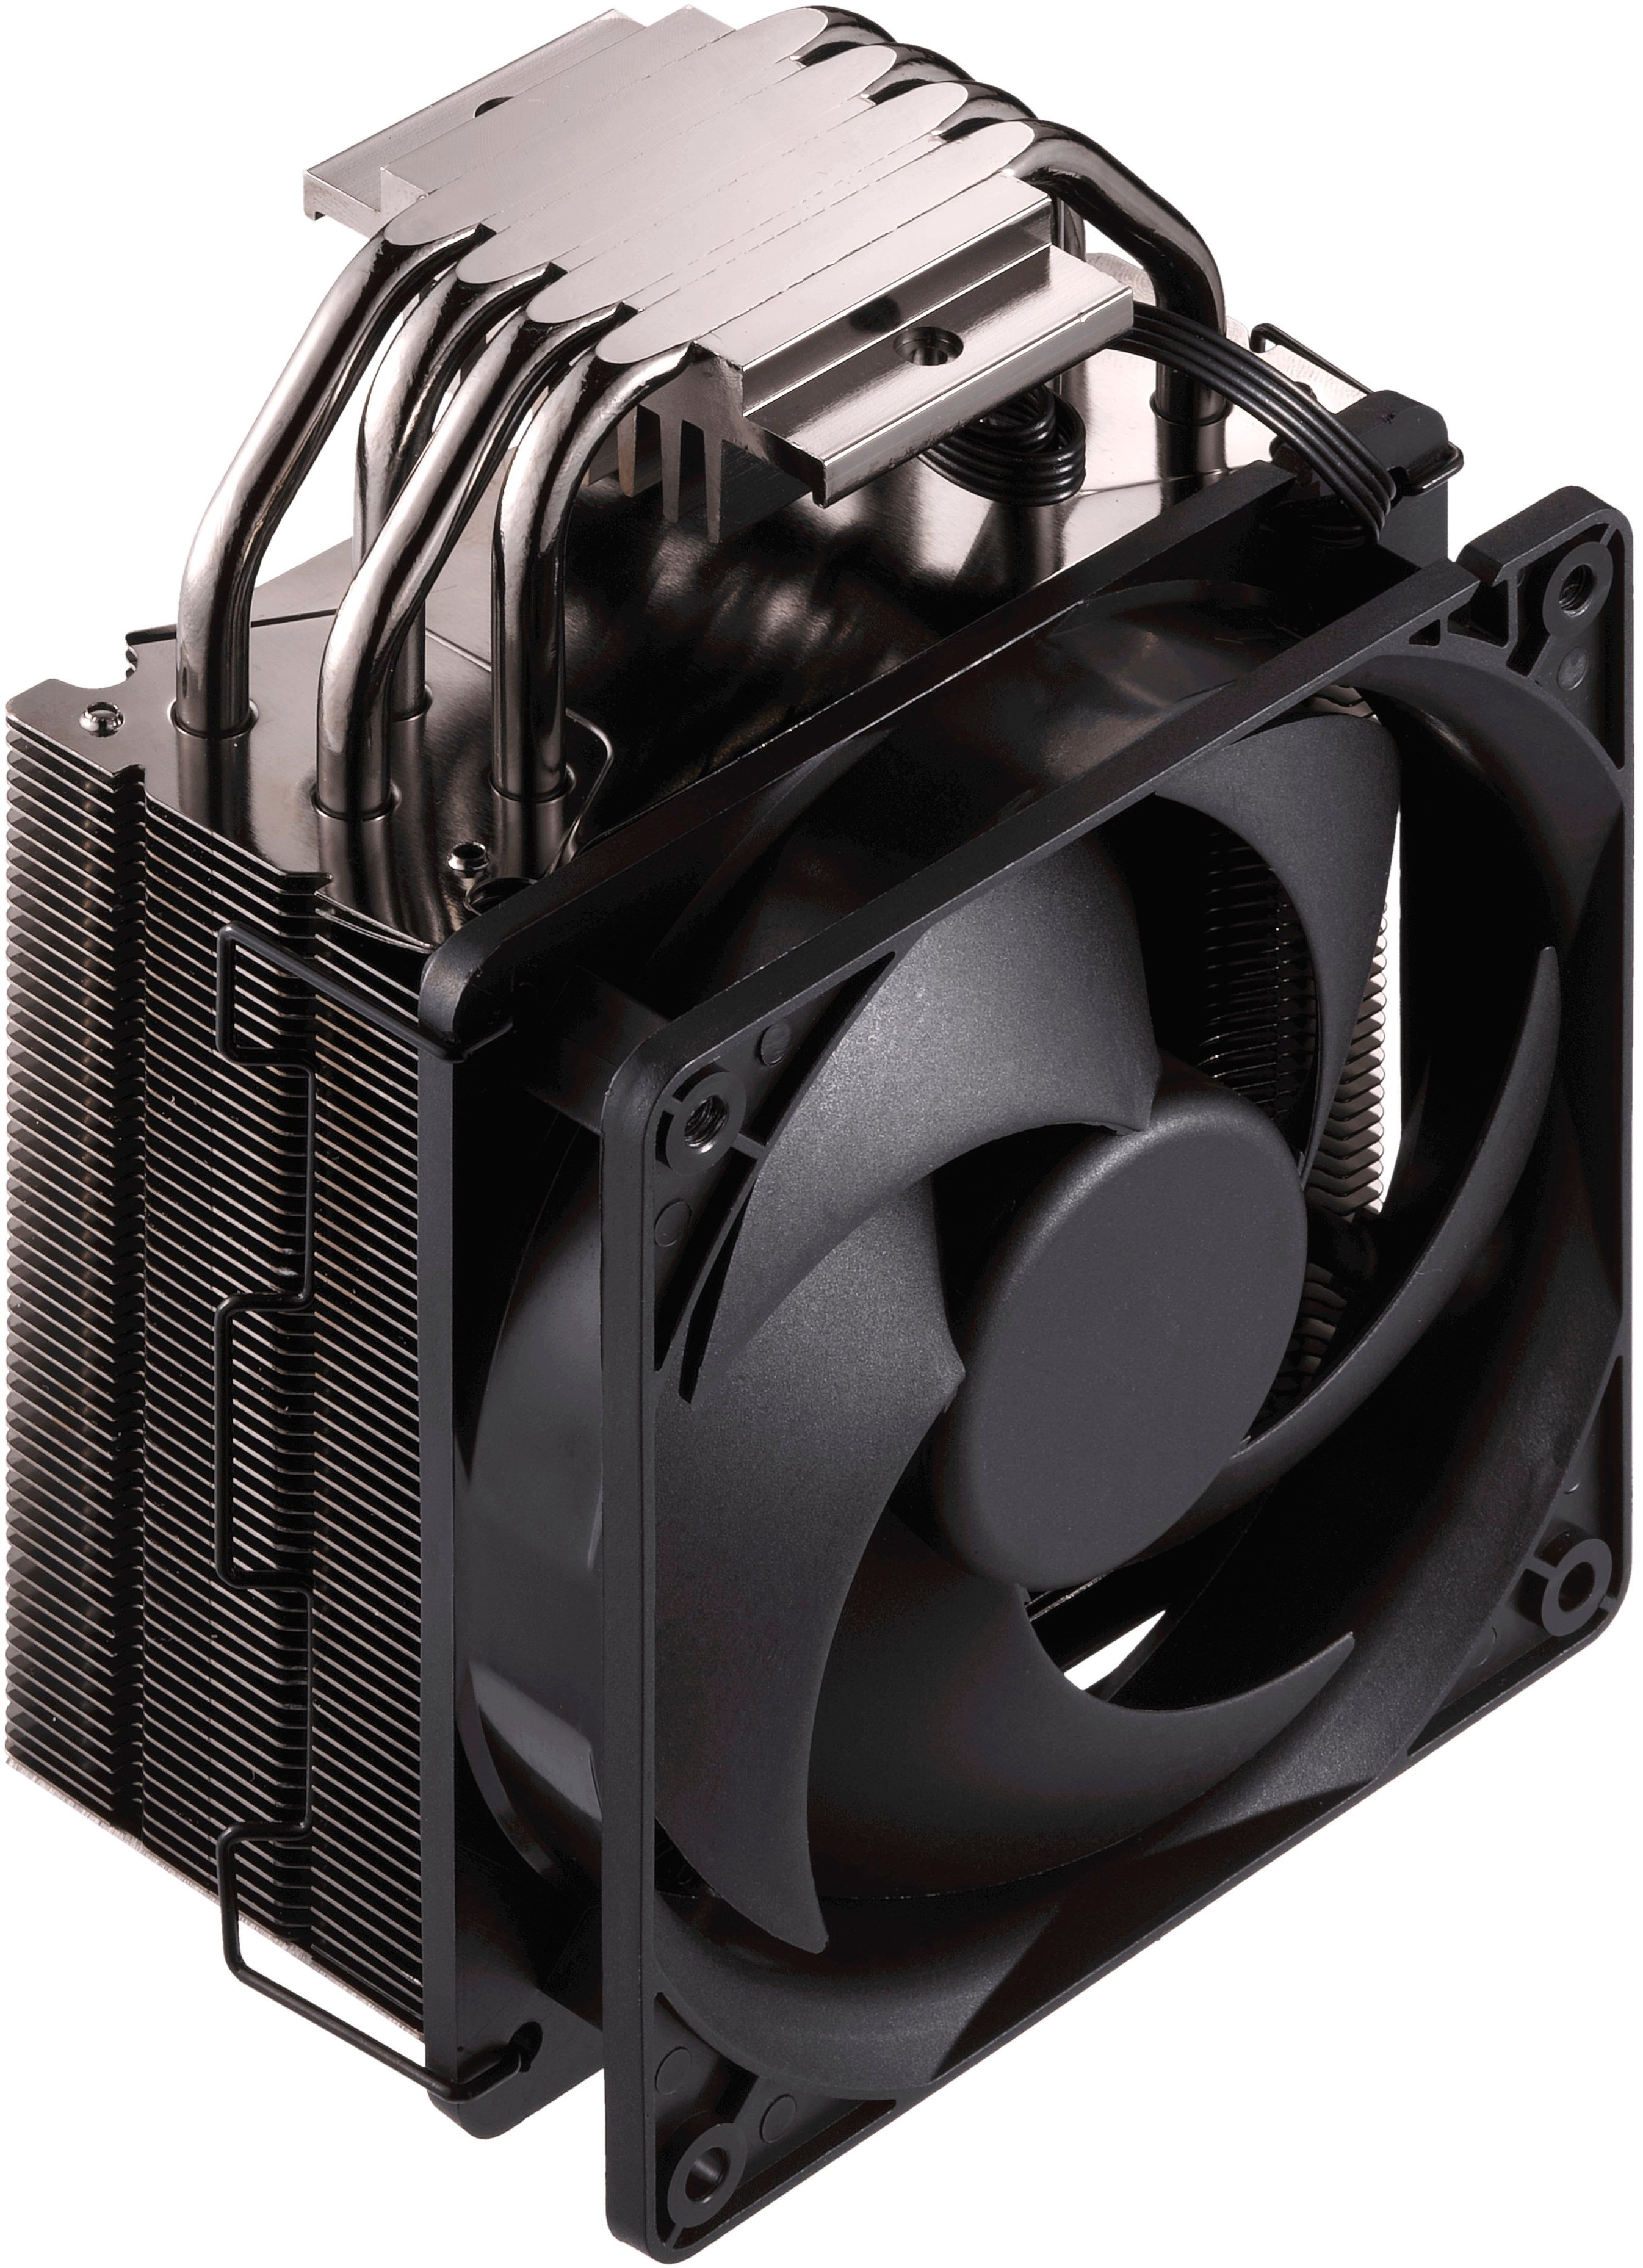 Cooler Master Hyper 212 LED Turbo ARGB CPU Air Cooler - Jet Black Aluminium  Finish, 4 Continuous Direct Contact Heat Pipes with Fins, Dual SickleFlow